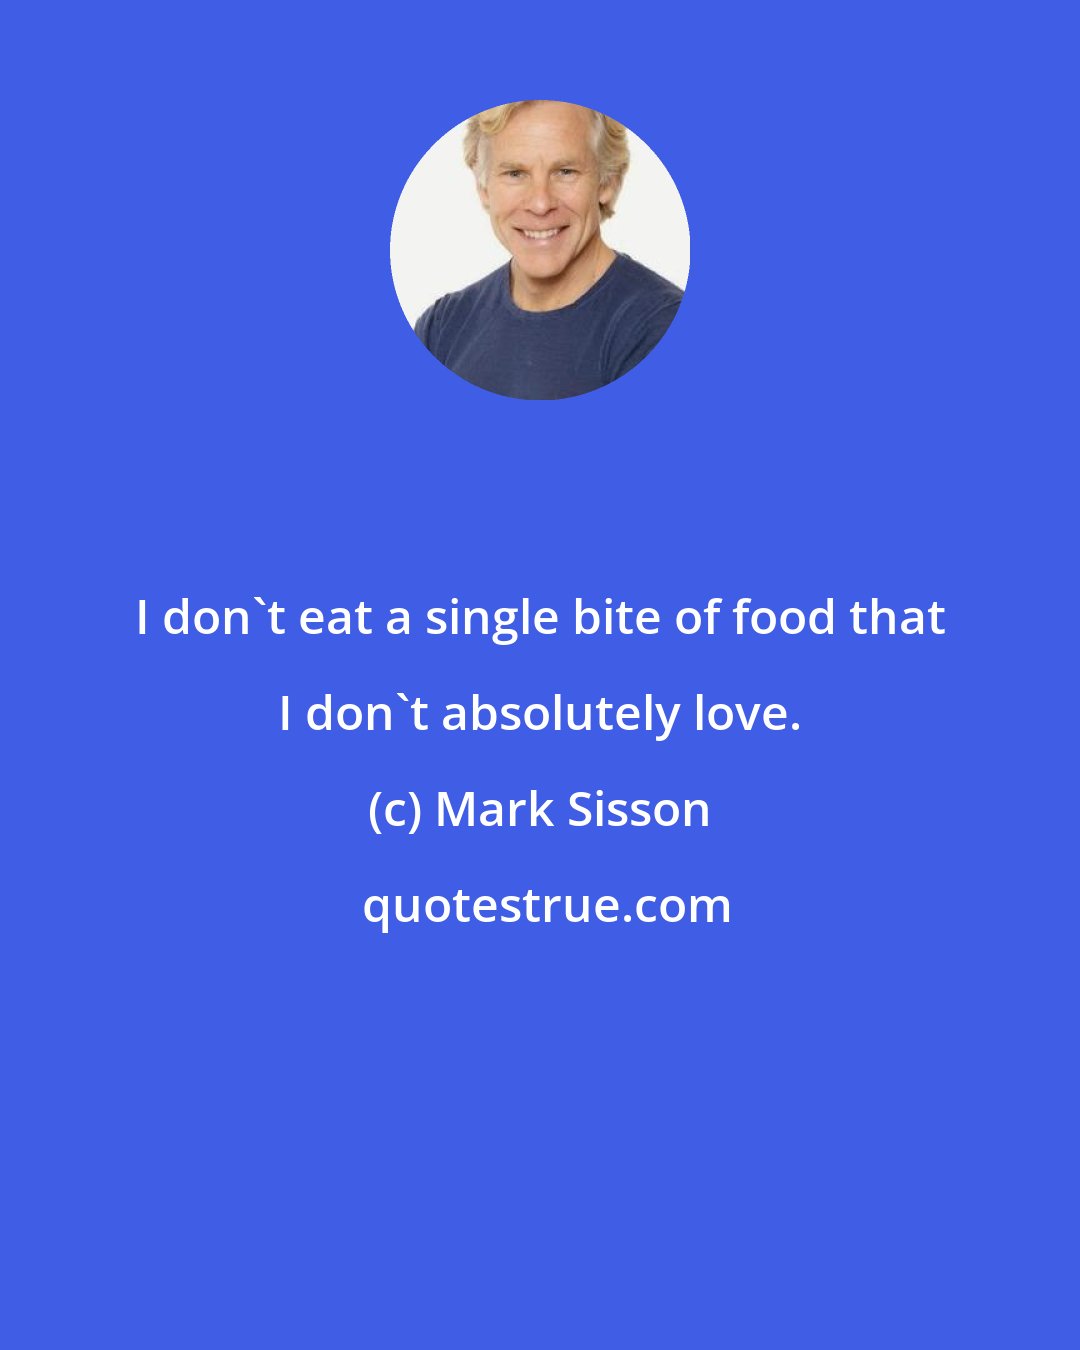 Mark Sisson: I don't eat a single bite of food that I don't absolutely love.